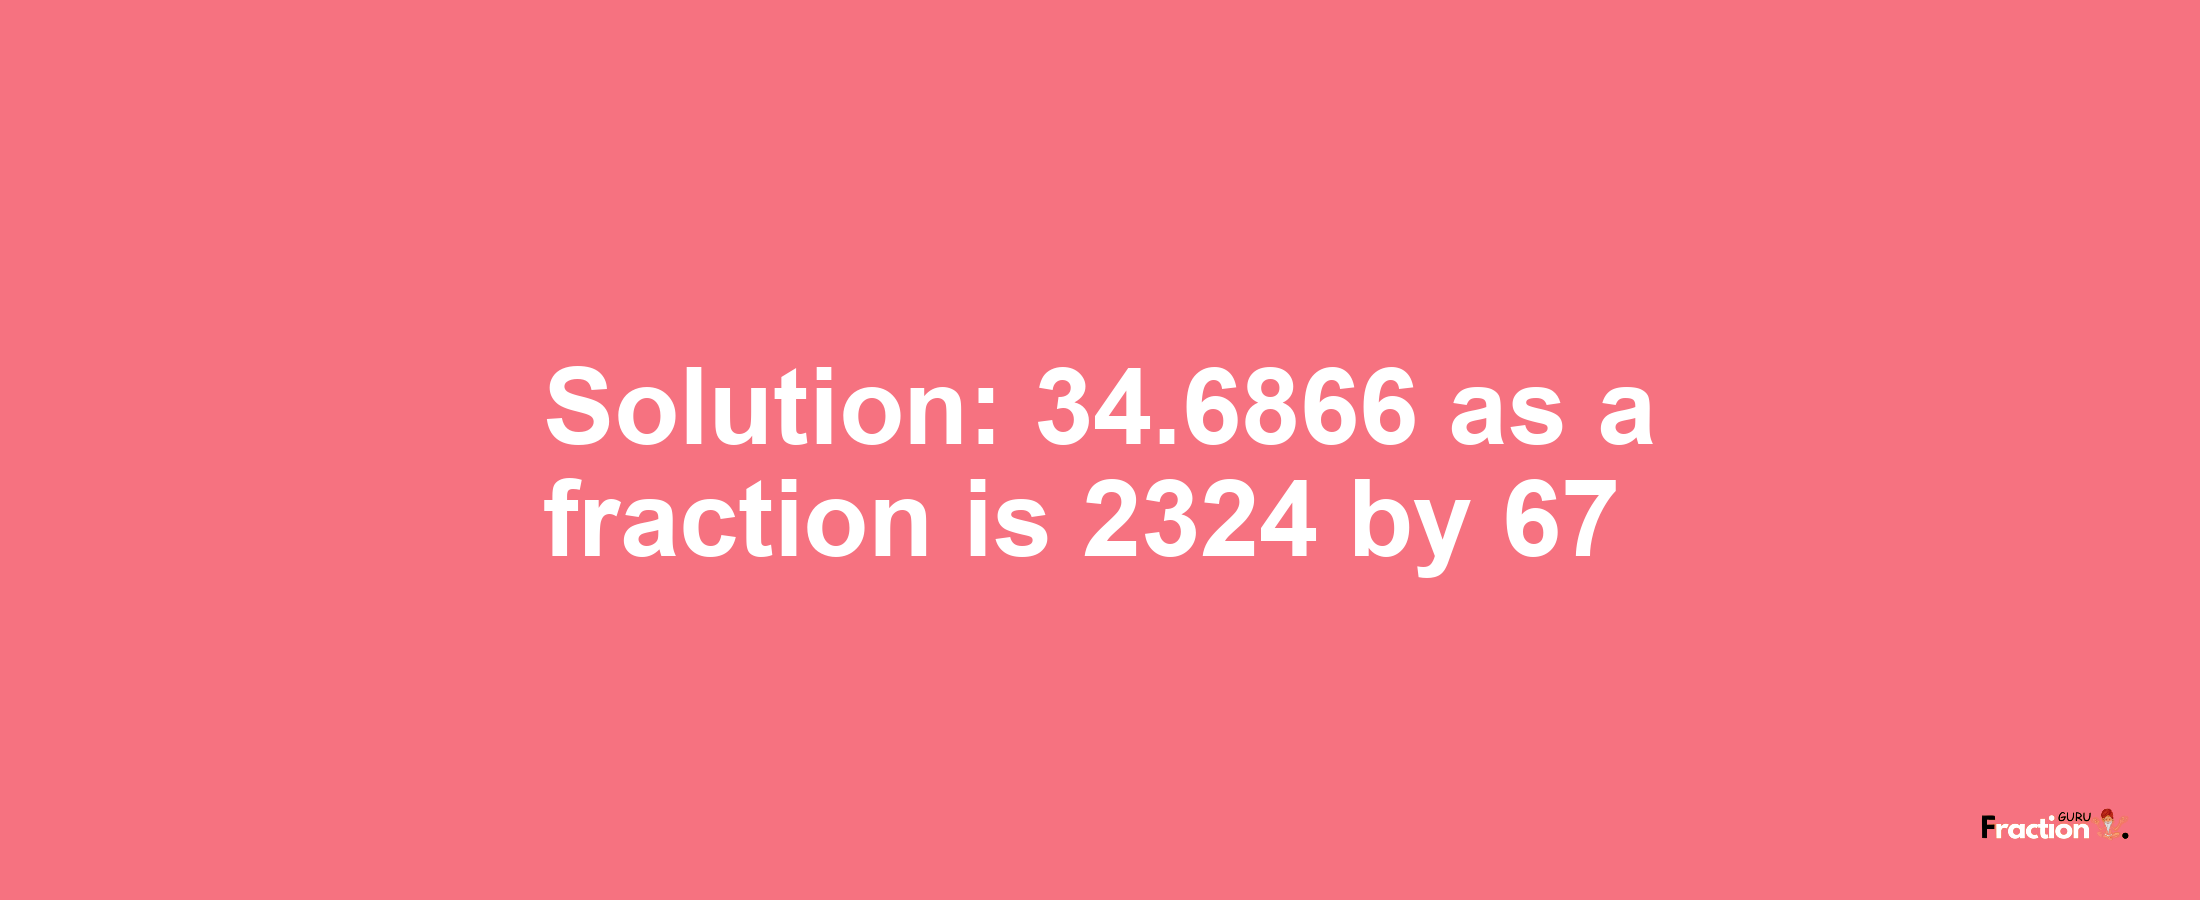 Solution:34.6866 as a fraction is 2324/67